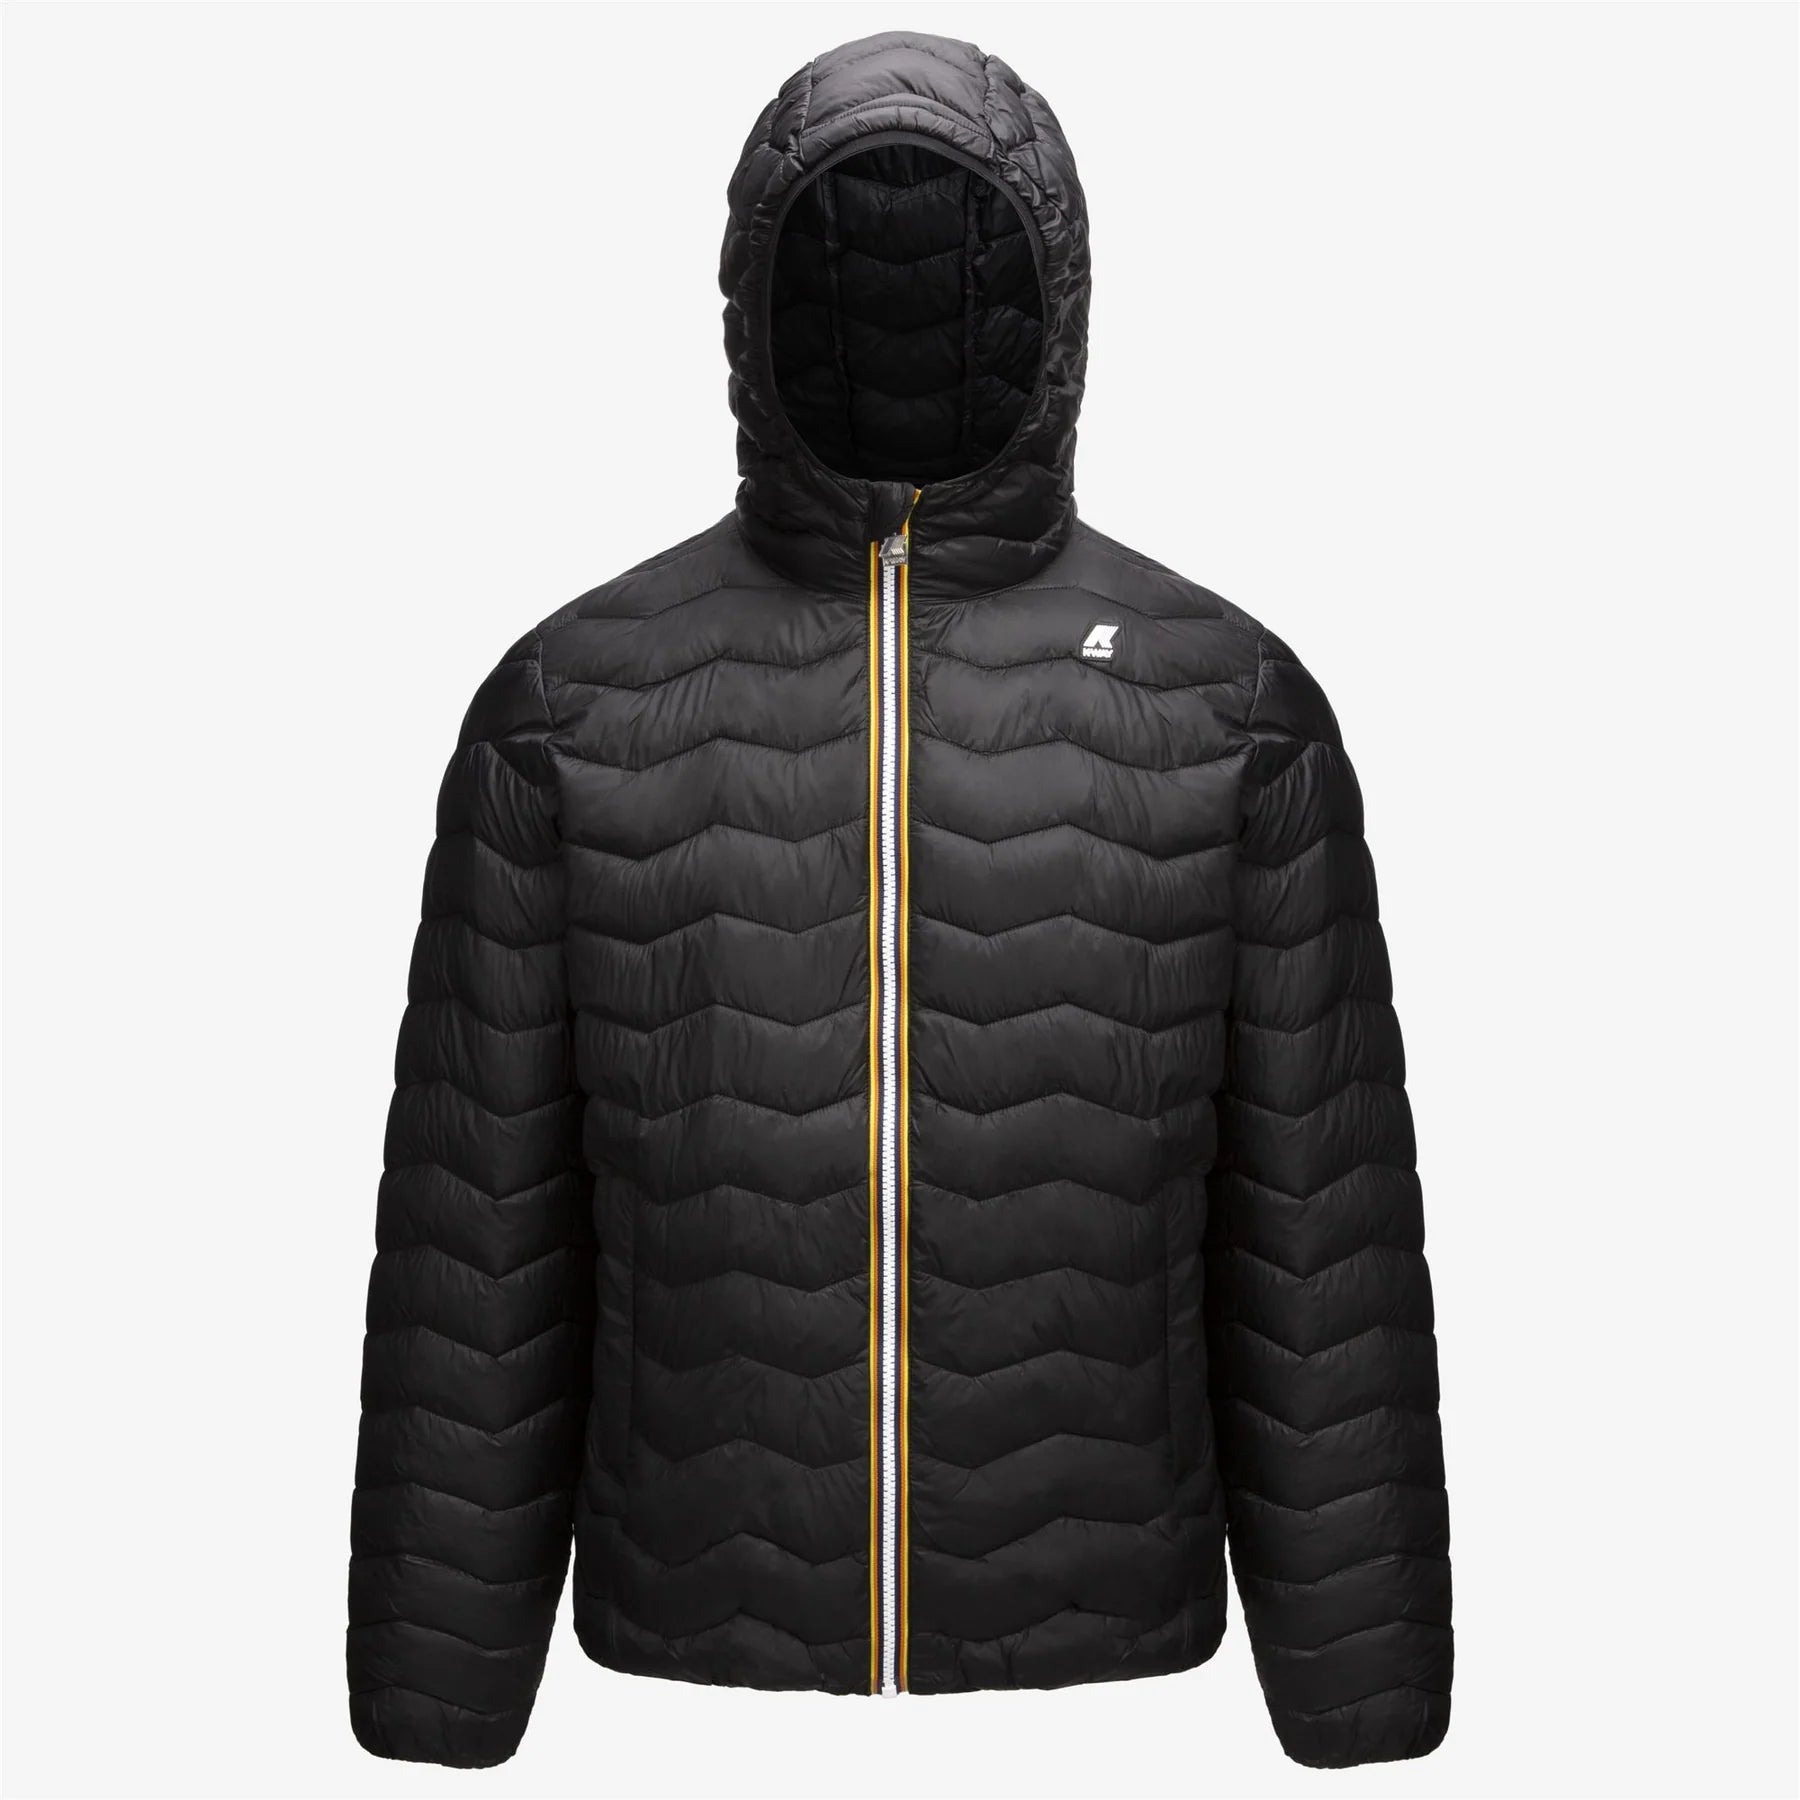 Jack Warm - Men's Quilted Packable Puffer Jacket in Black Pure